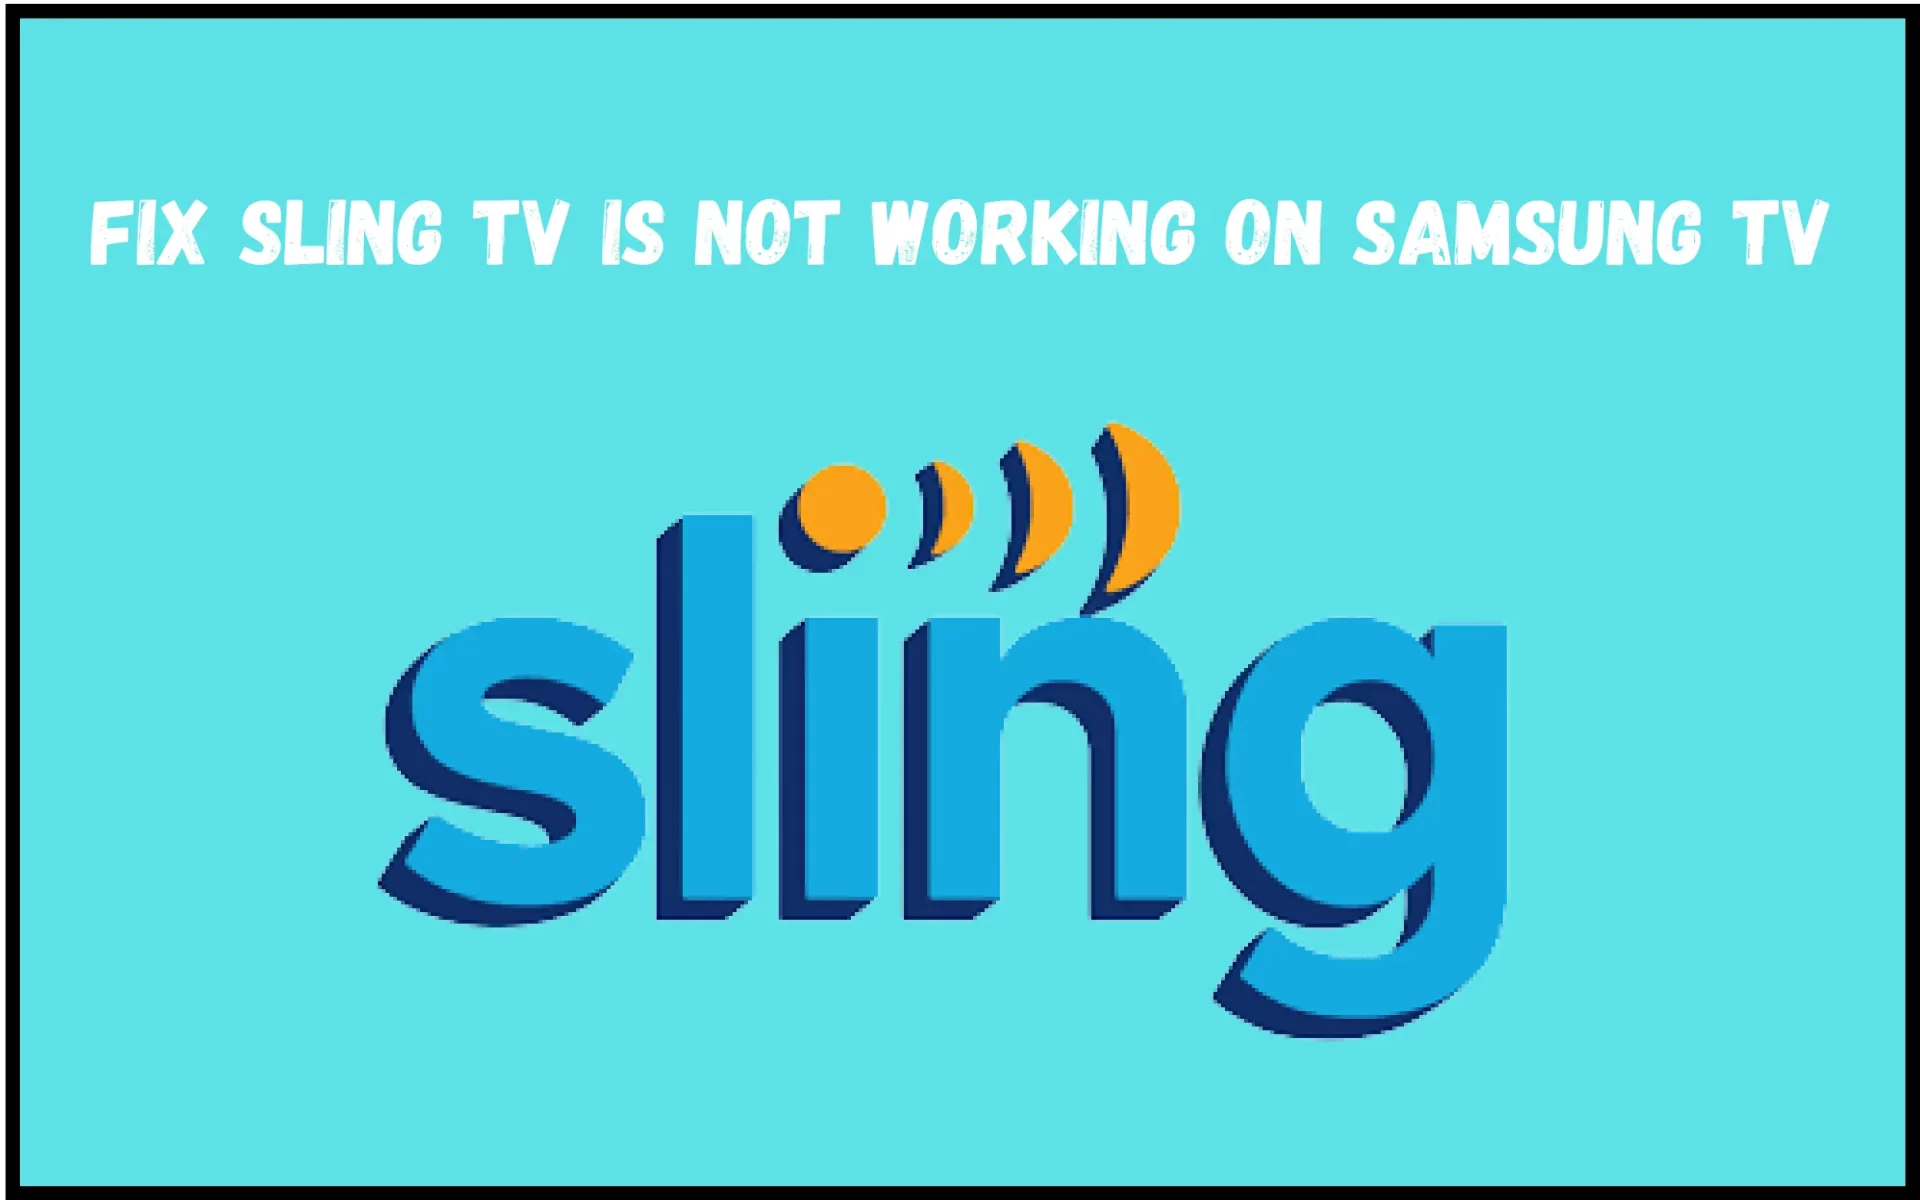 Sling TV Is Not Working On Samsung TV?